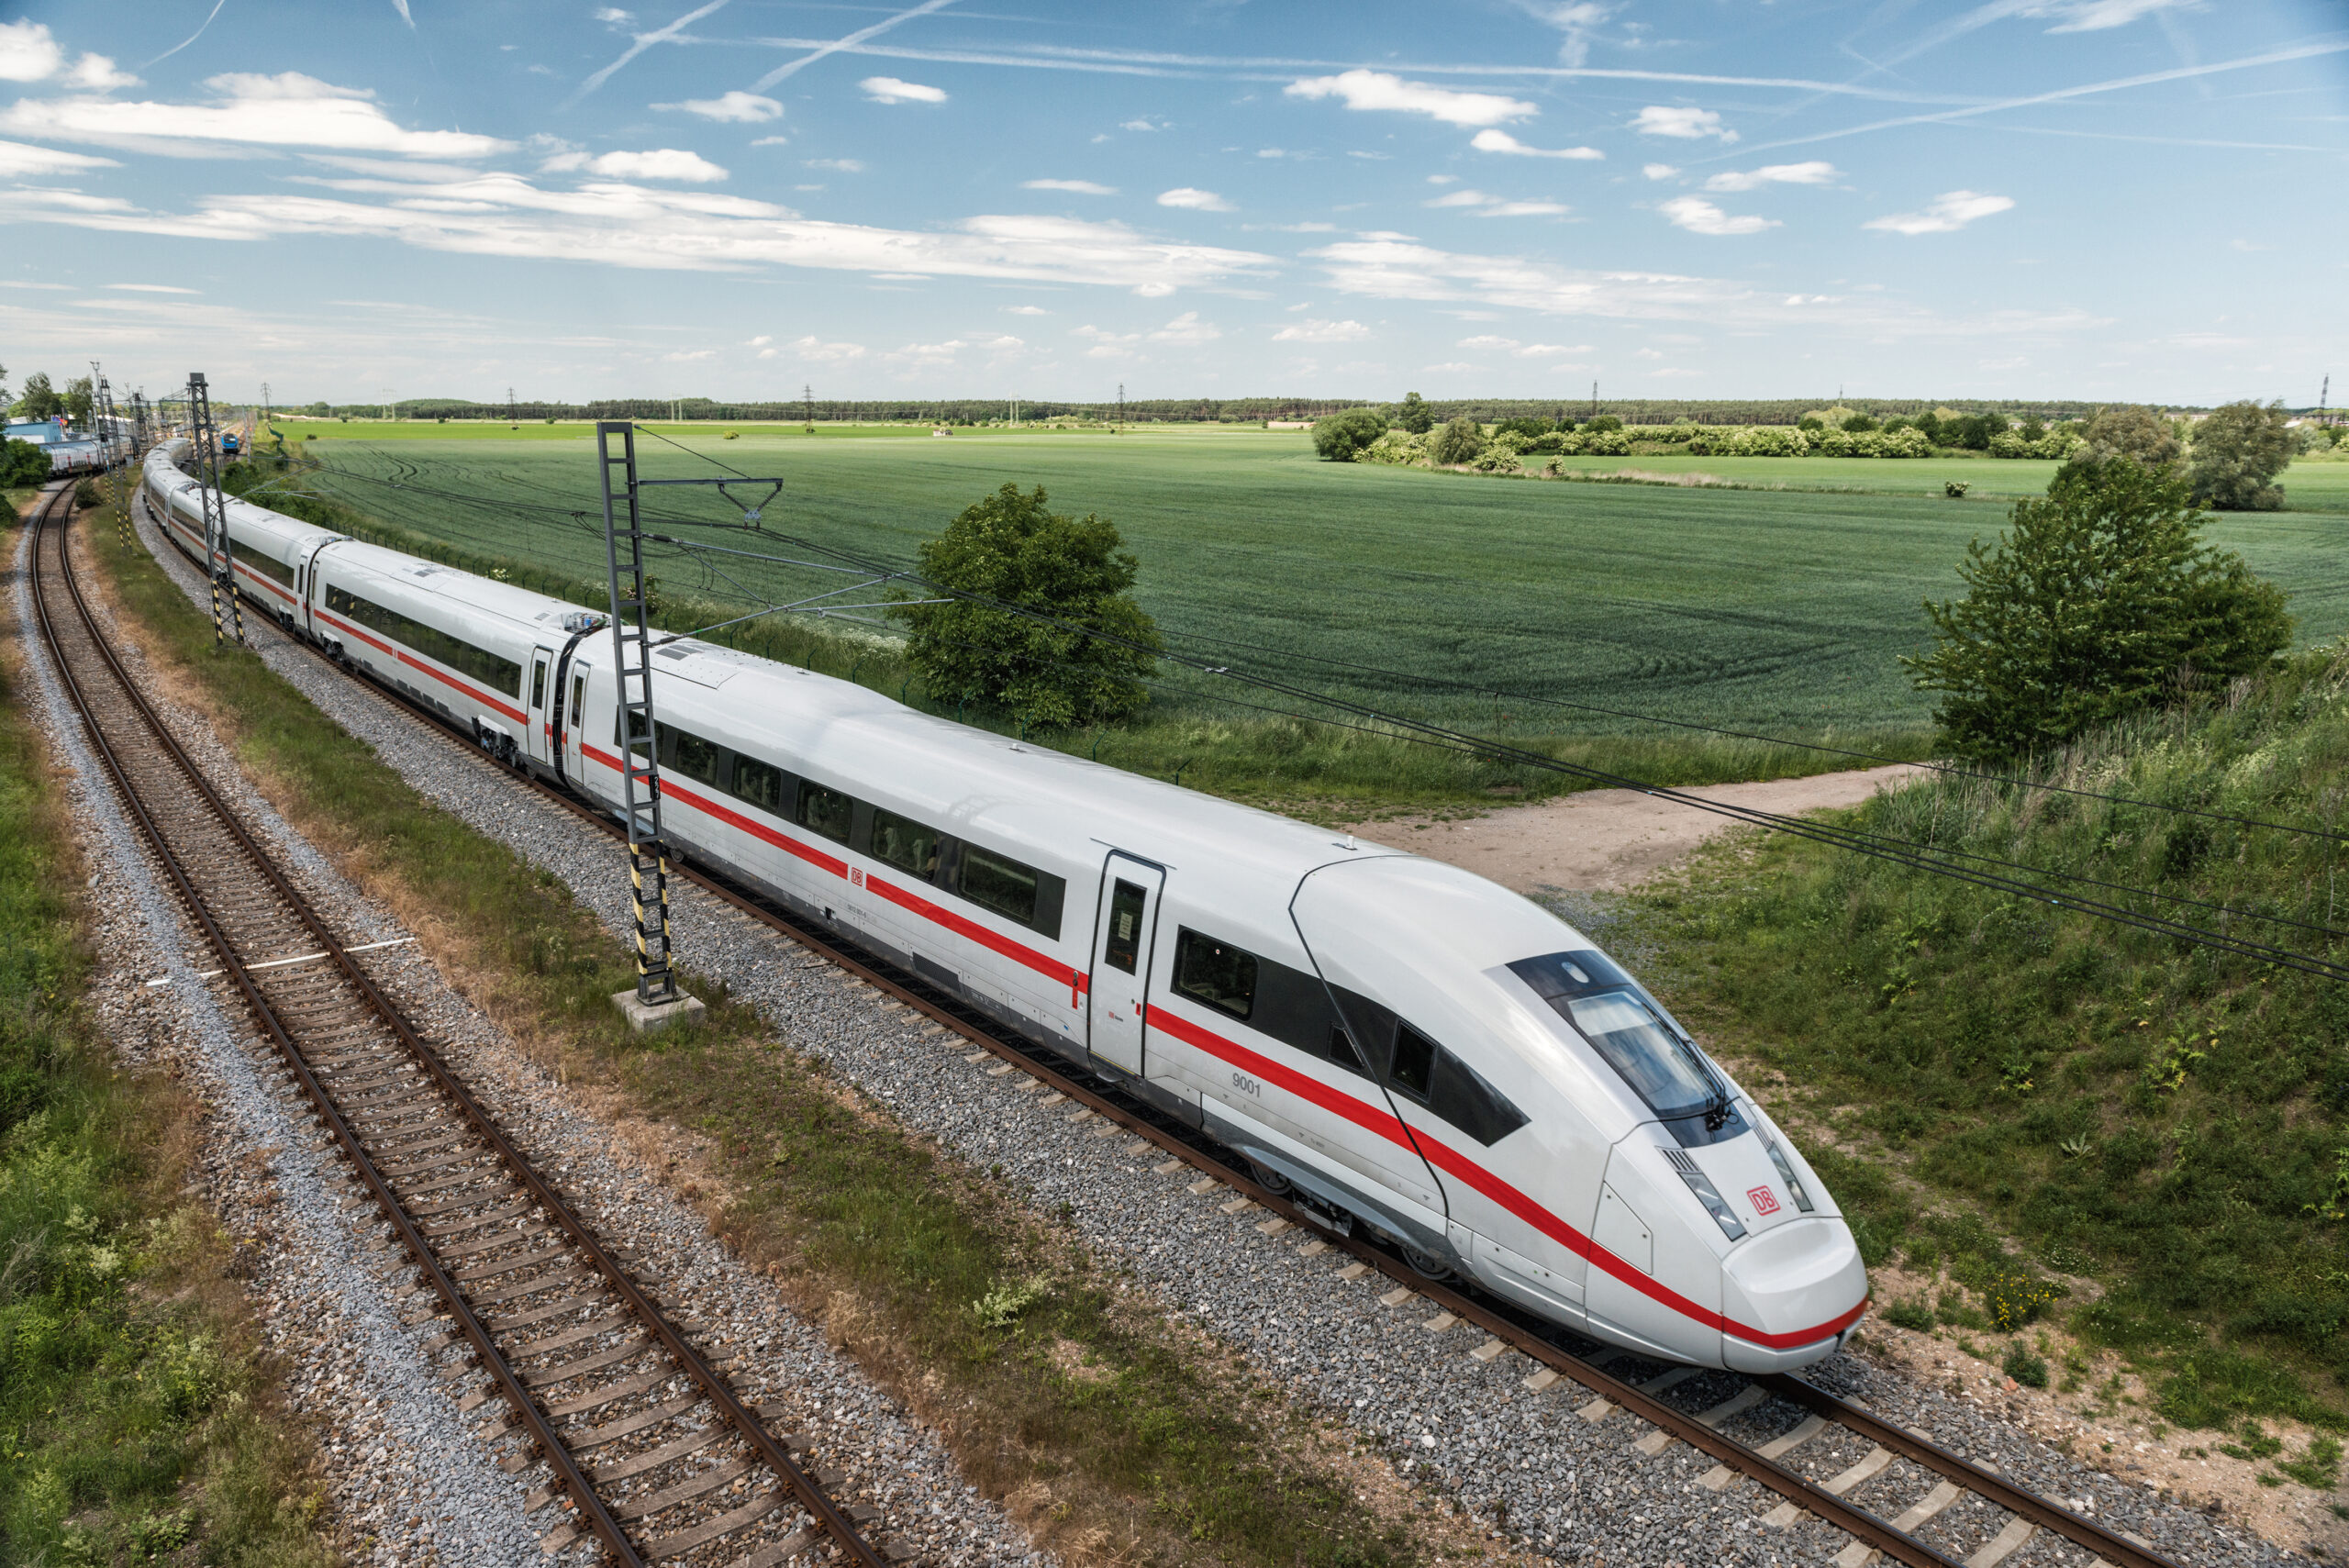 Photo of: United Airlines Deutsche Bahn New commercial Cooperation // Siemens Mobility